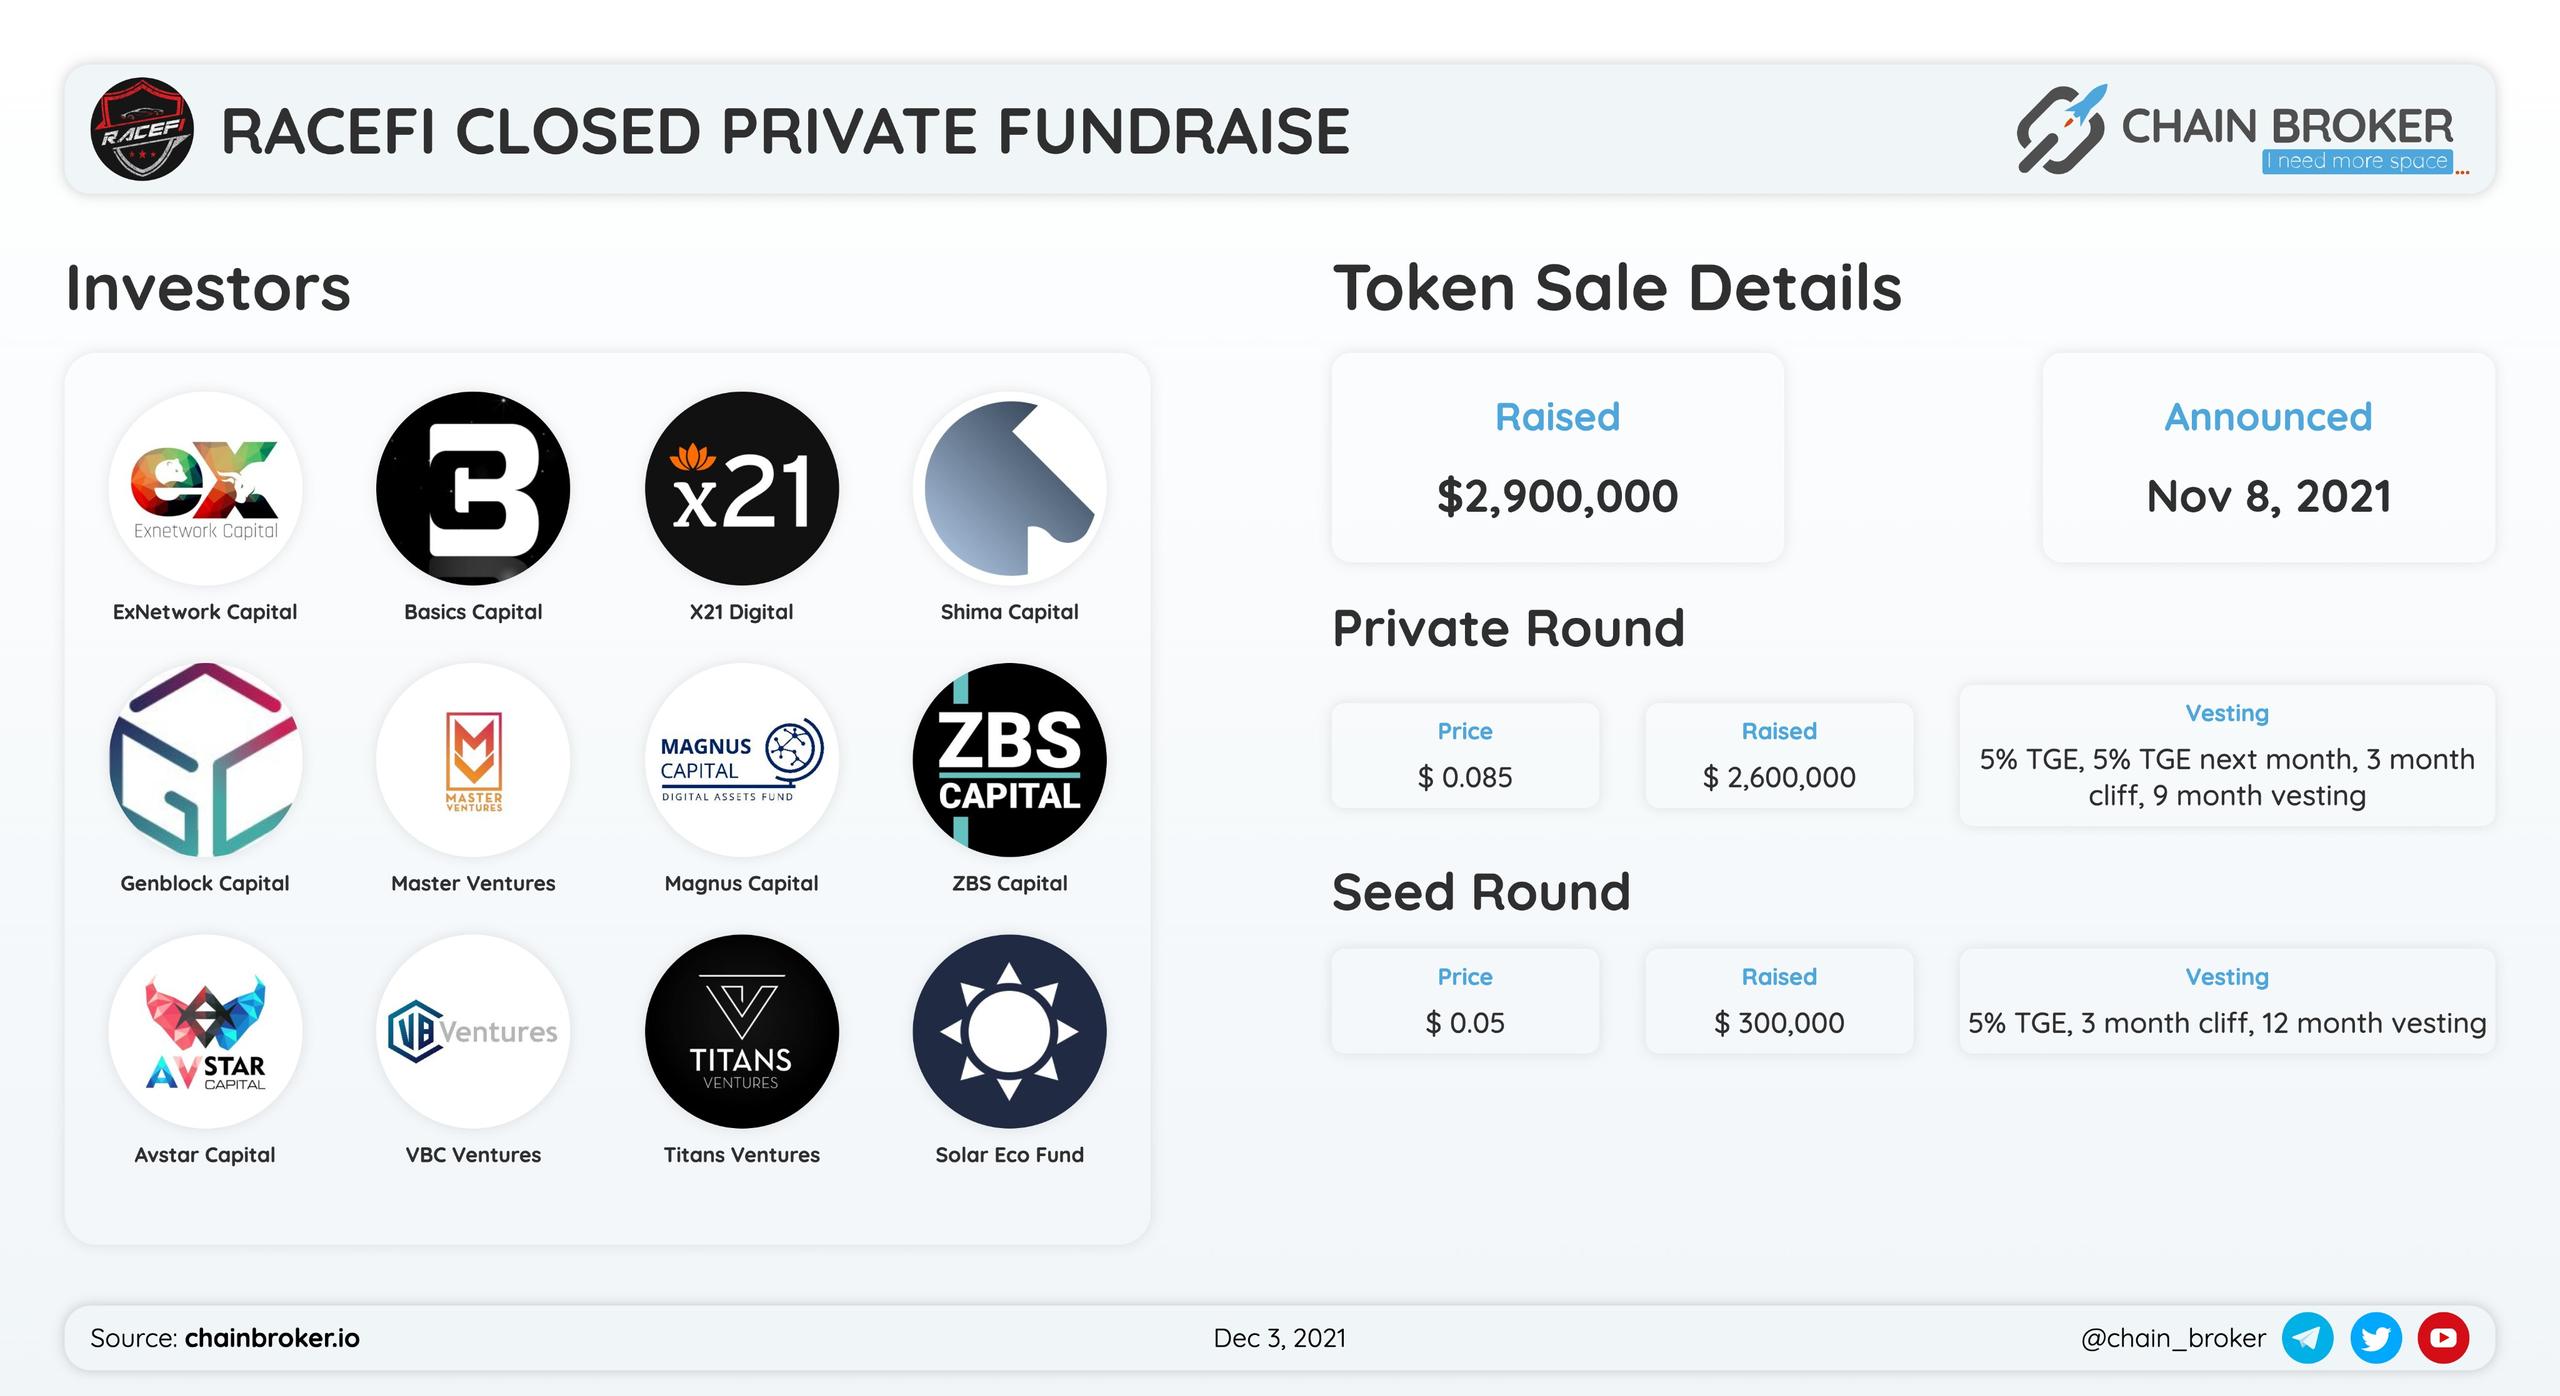 Racefi $RACEFI has closed $2.9M Seed/Private Round.